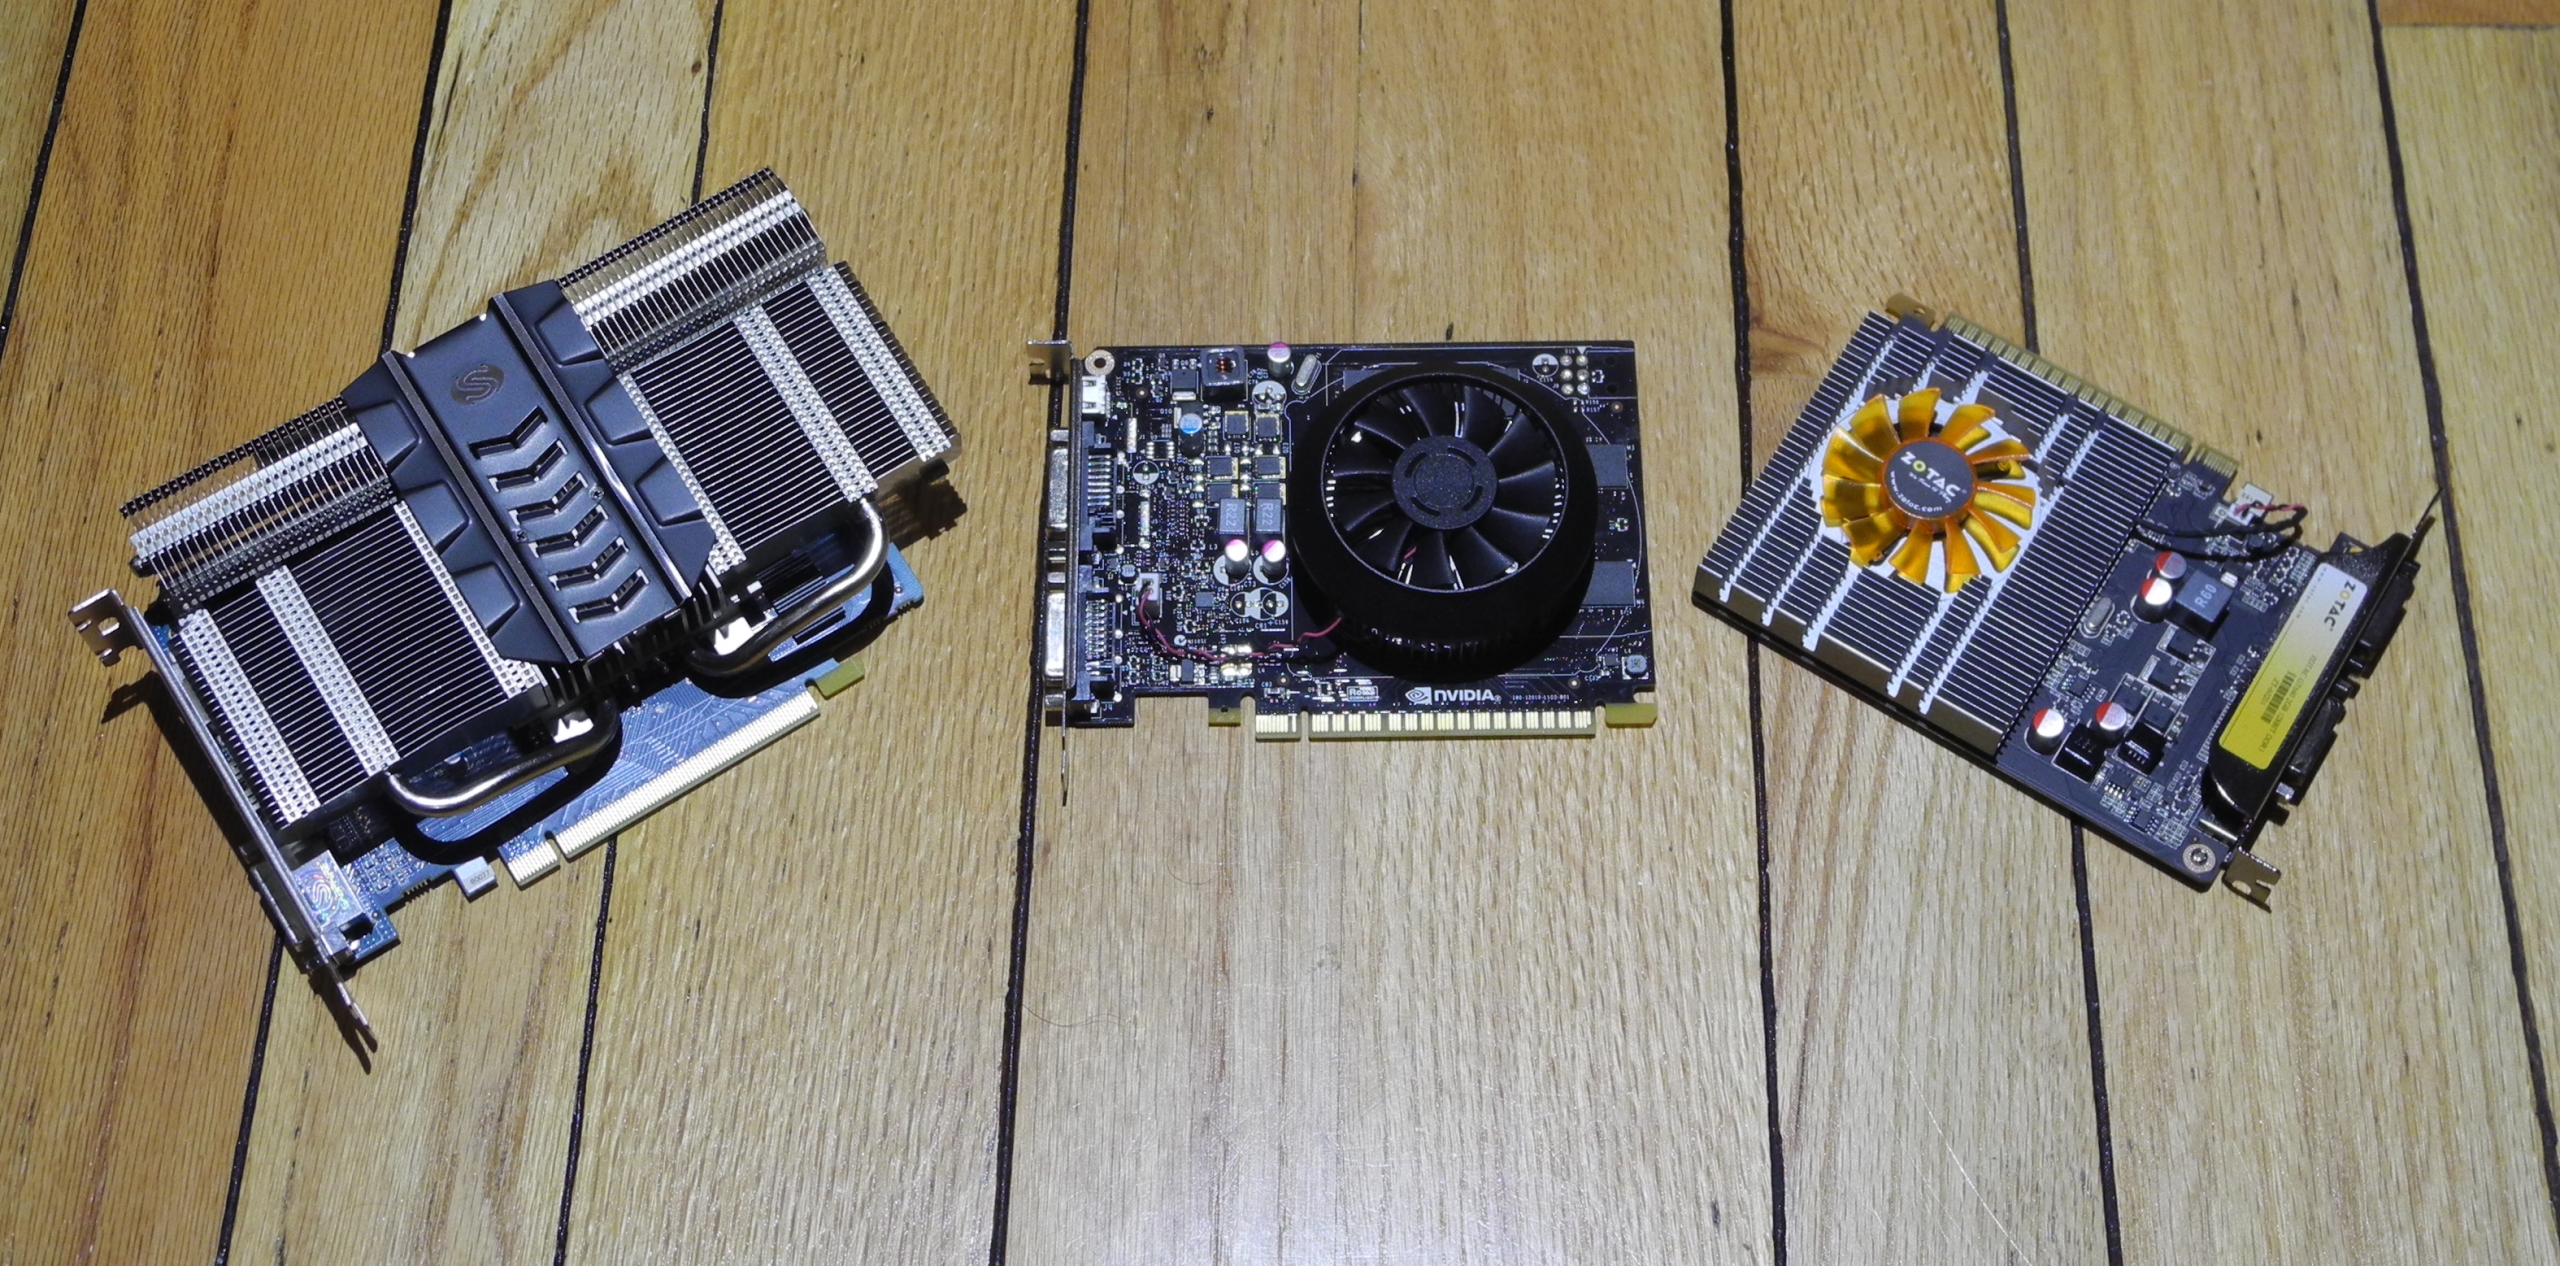 Htpc Aspects Introduction The Nvidia Geforce Gtx 750 Ti And Gtx 750 Review Maxwell Makes Its Move